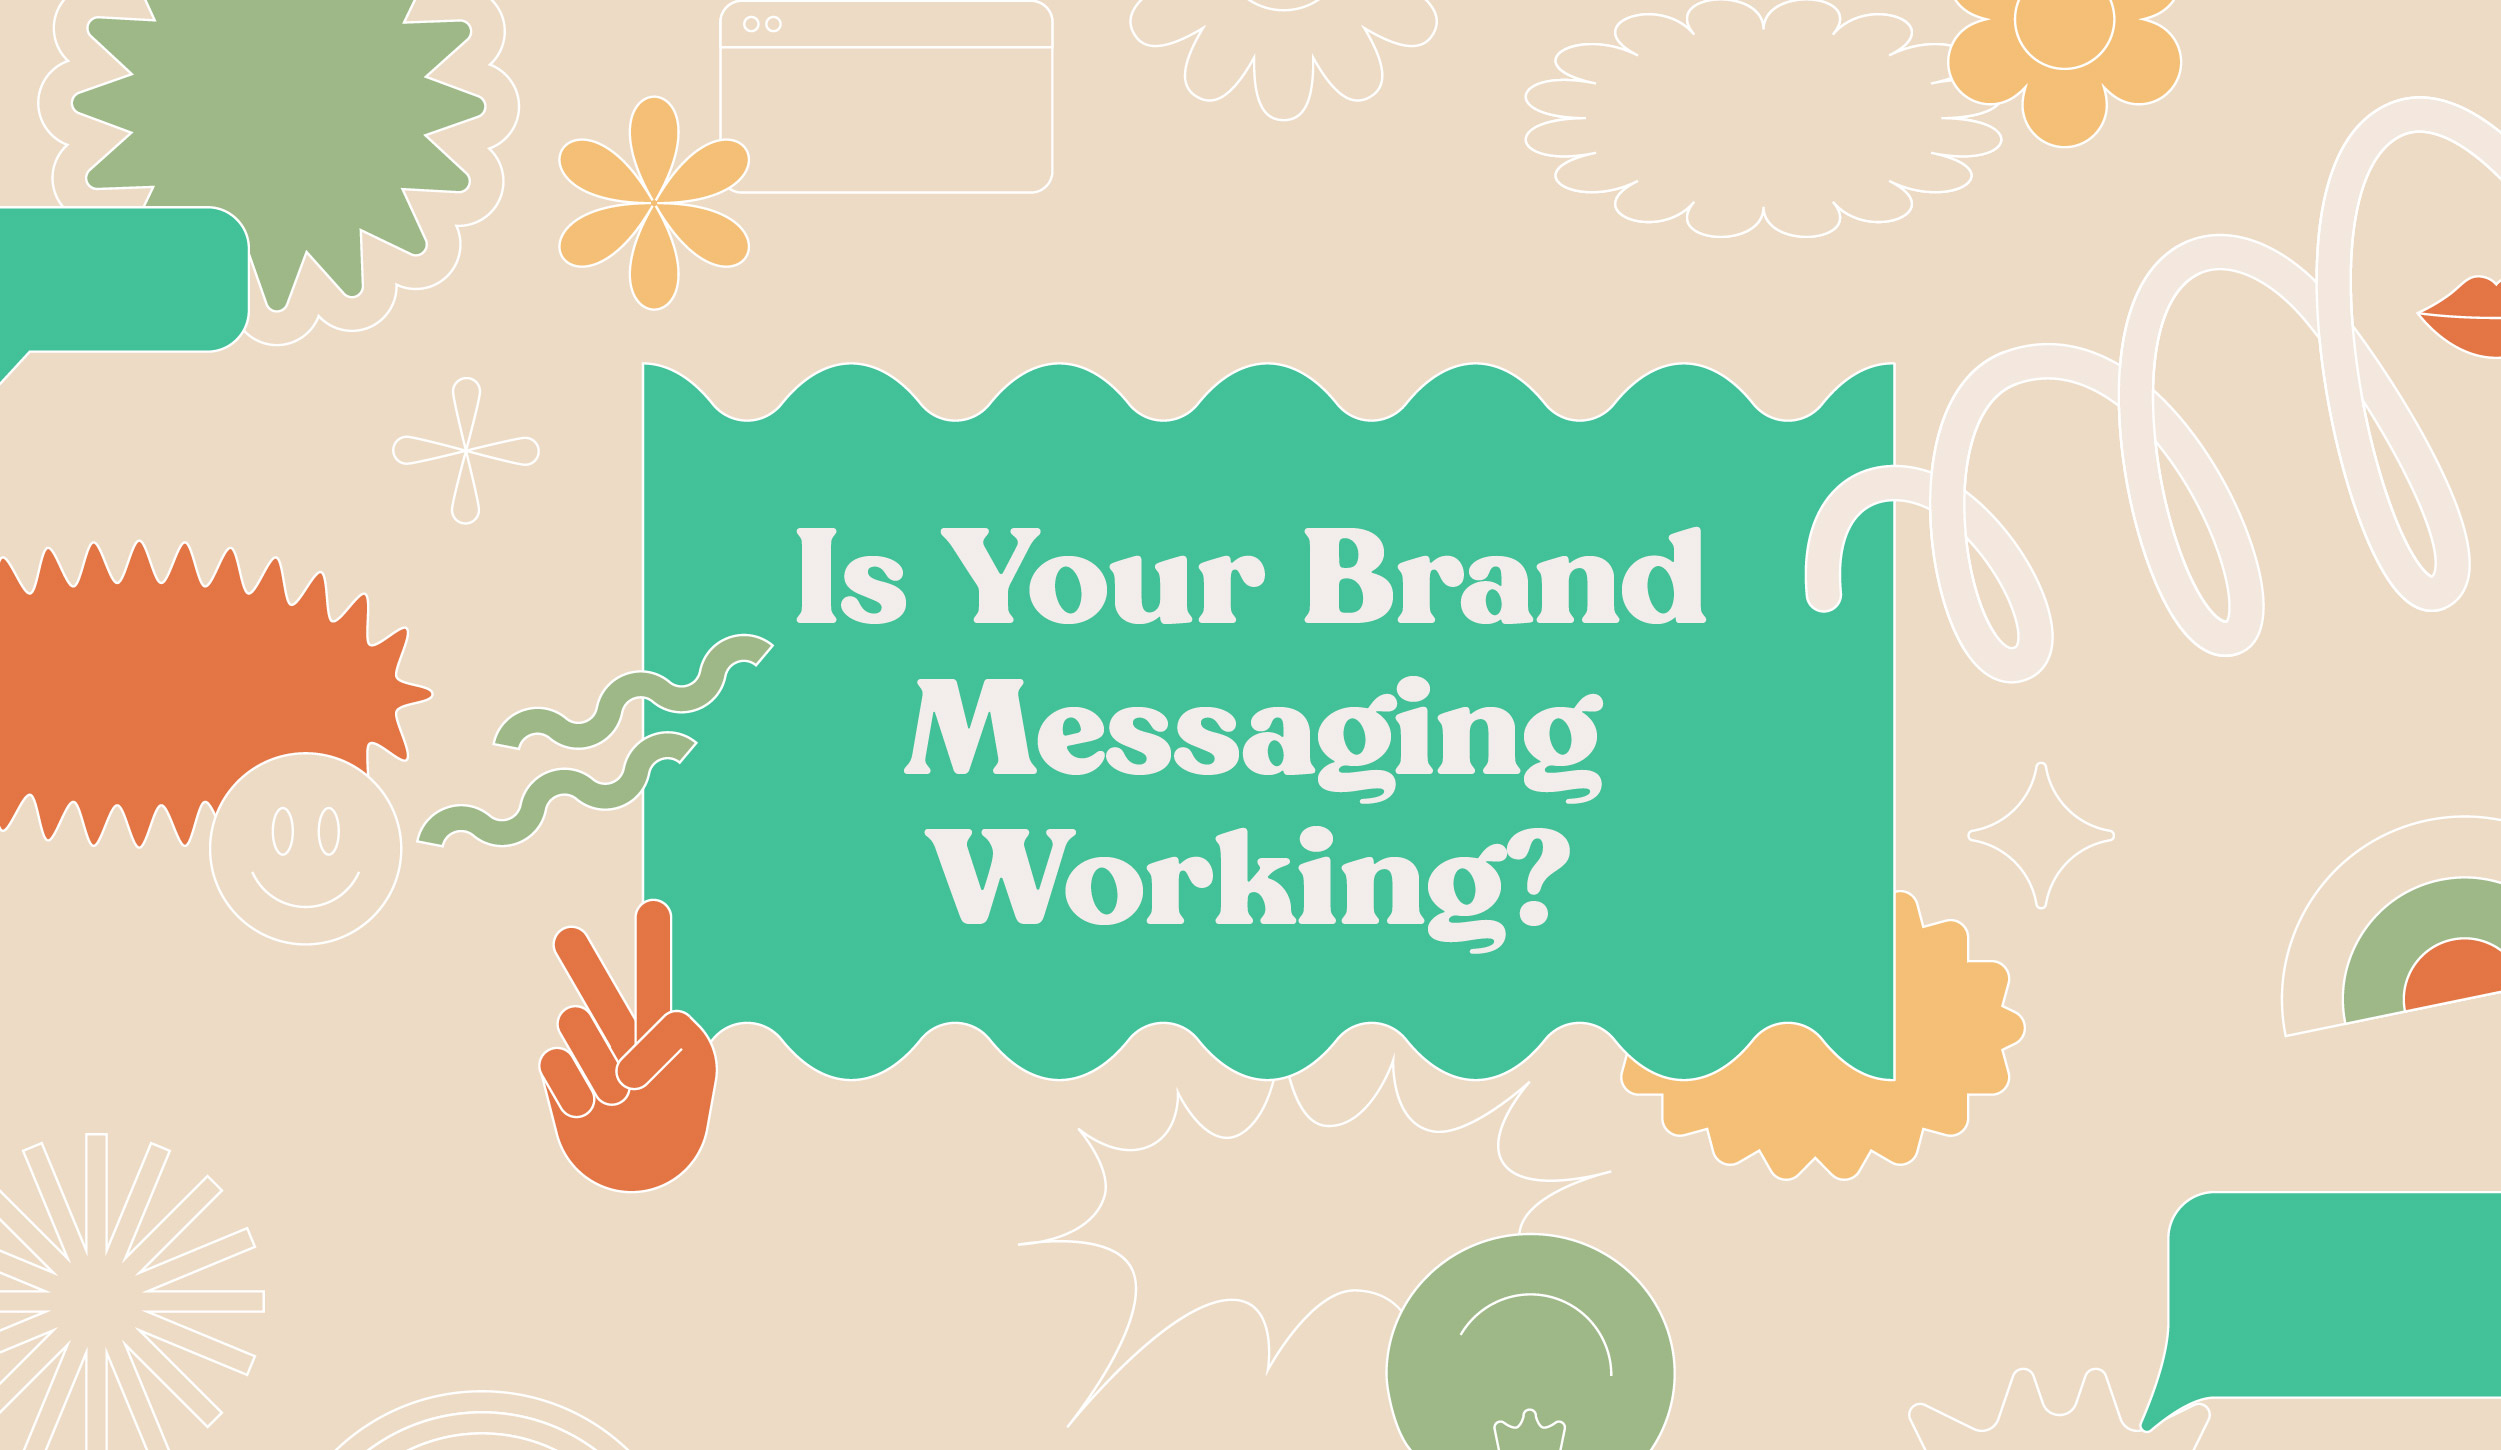 Is Your Brand Messaging Working?